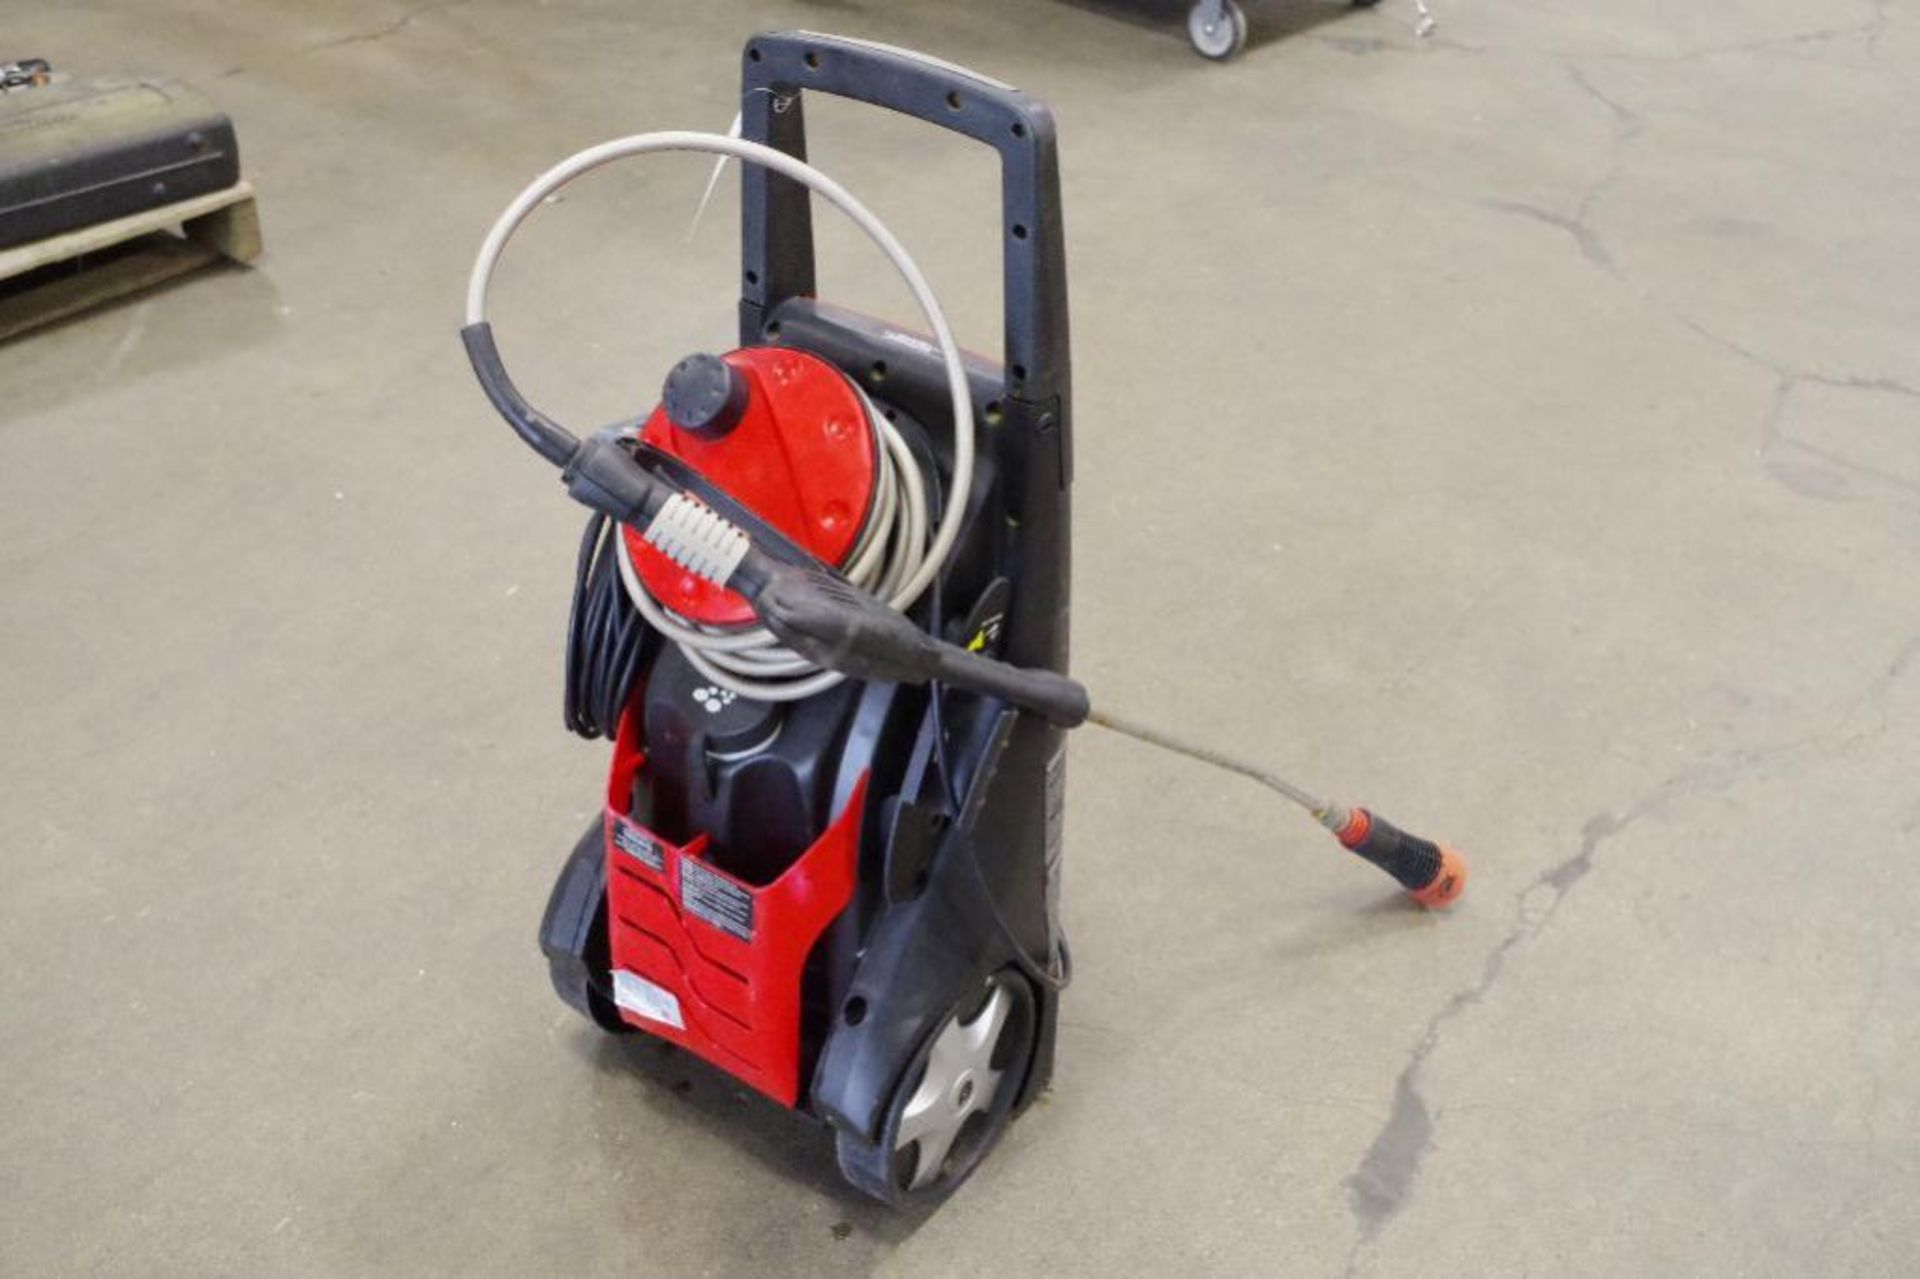 POWERWASHER Electric Pressure Washer M/N H2010 (Condition Unknown) - Image 2 of 3